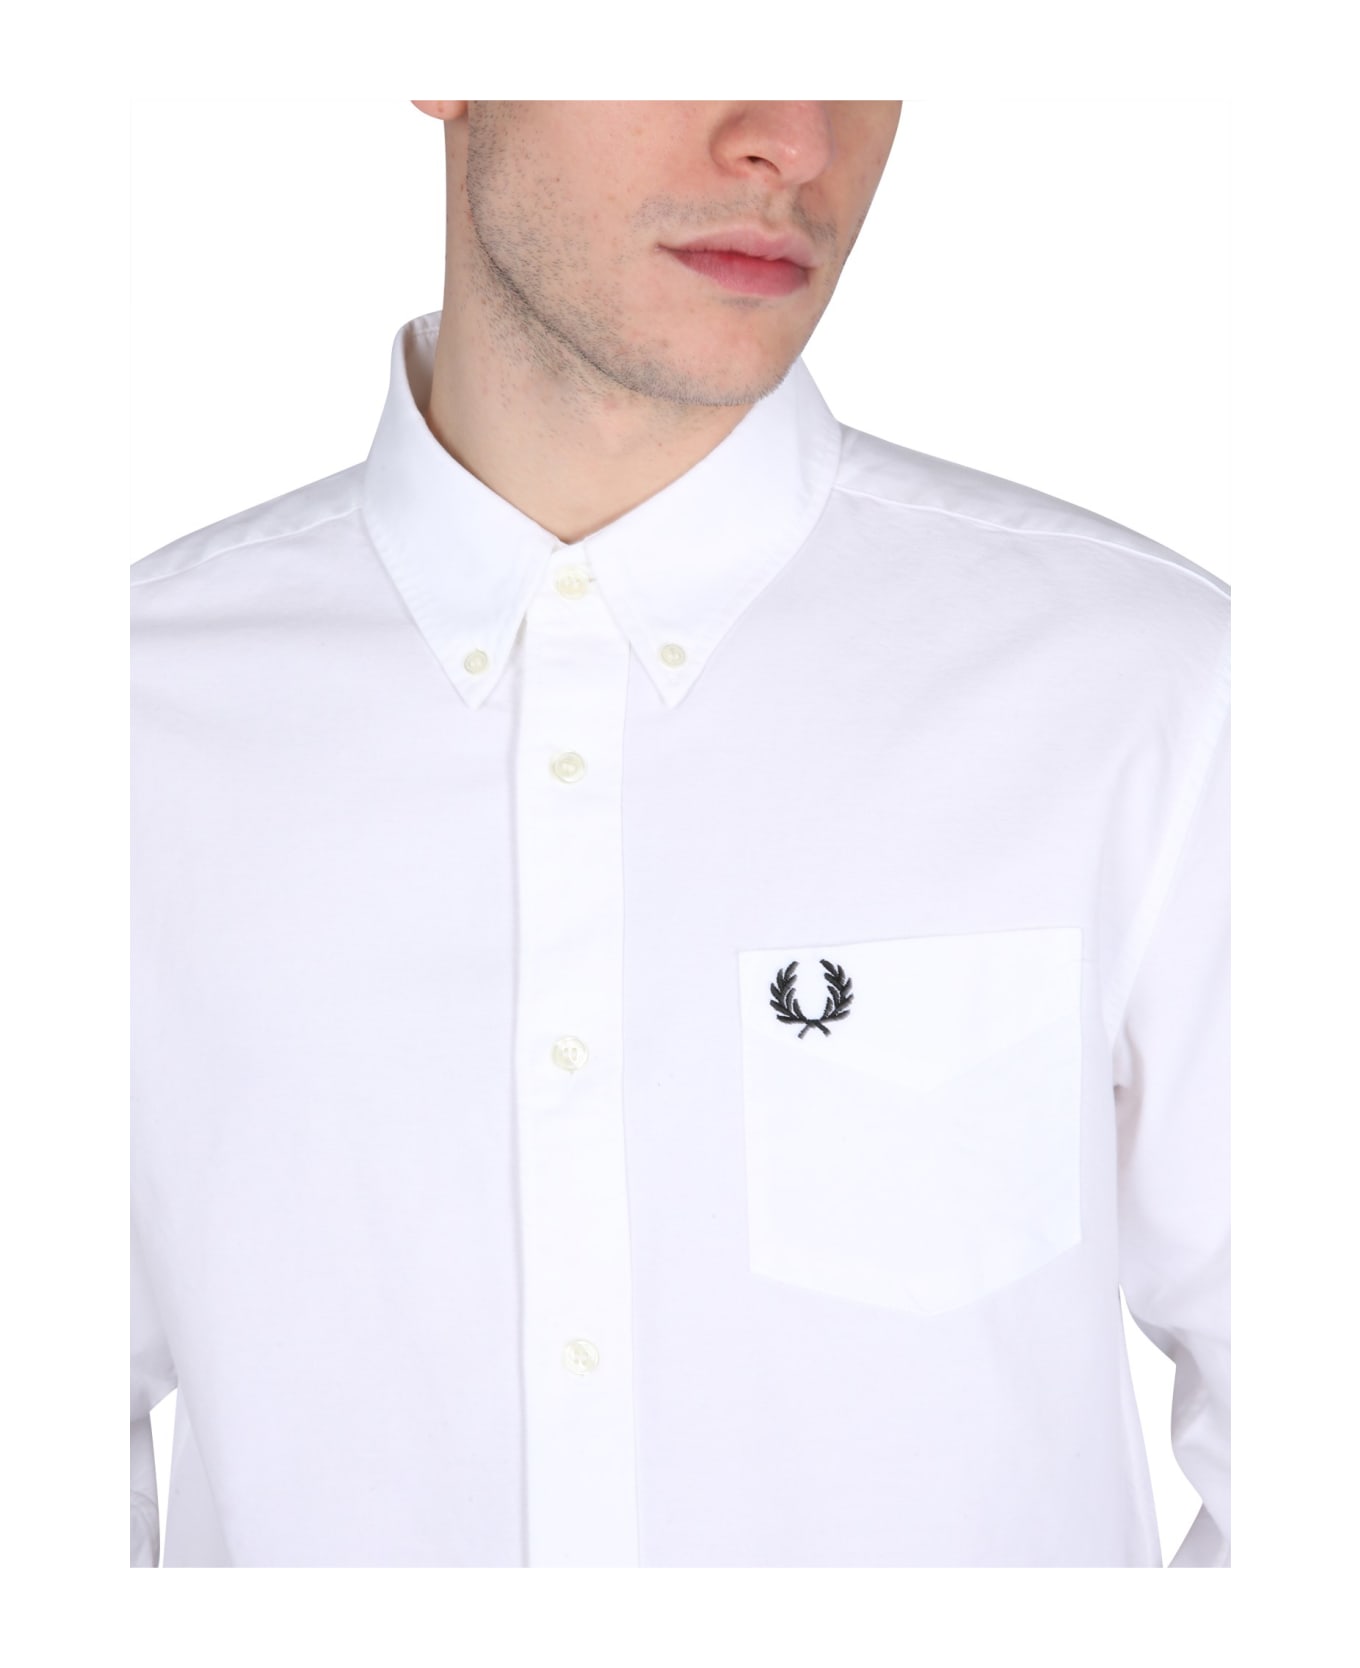 Fred Perry Cotton Poplin Oxford Shirt - White